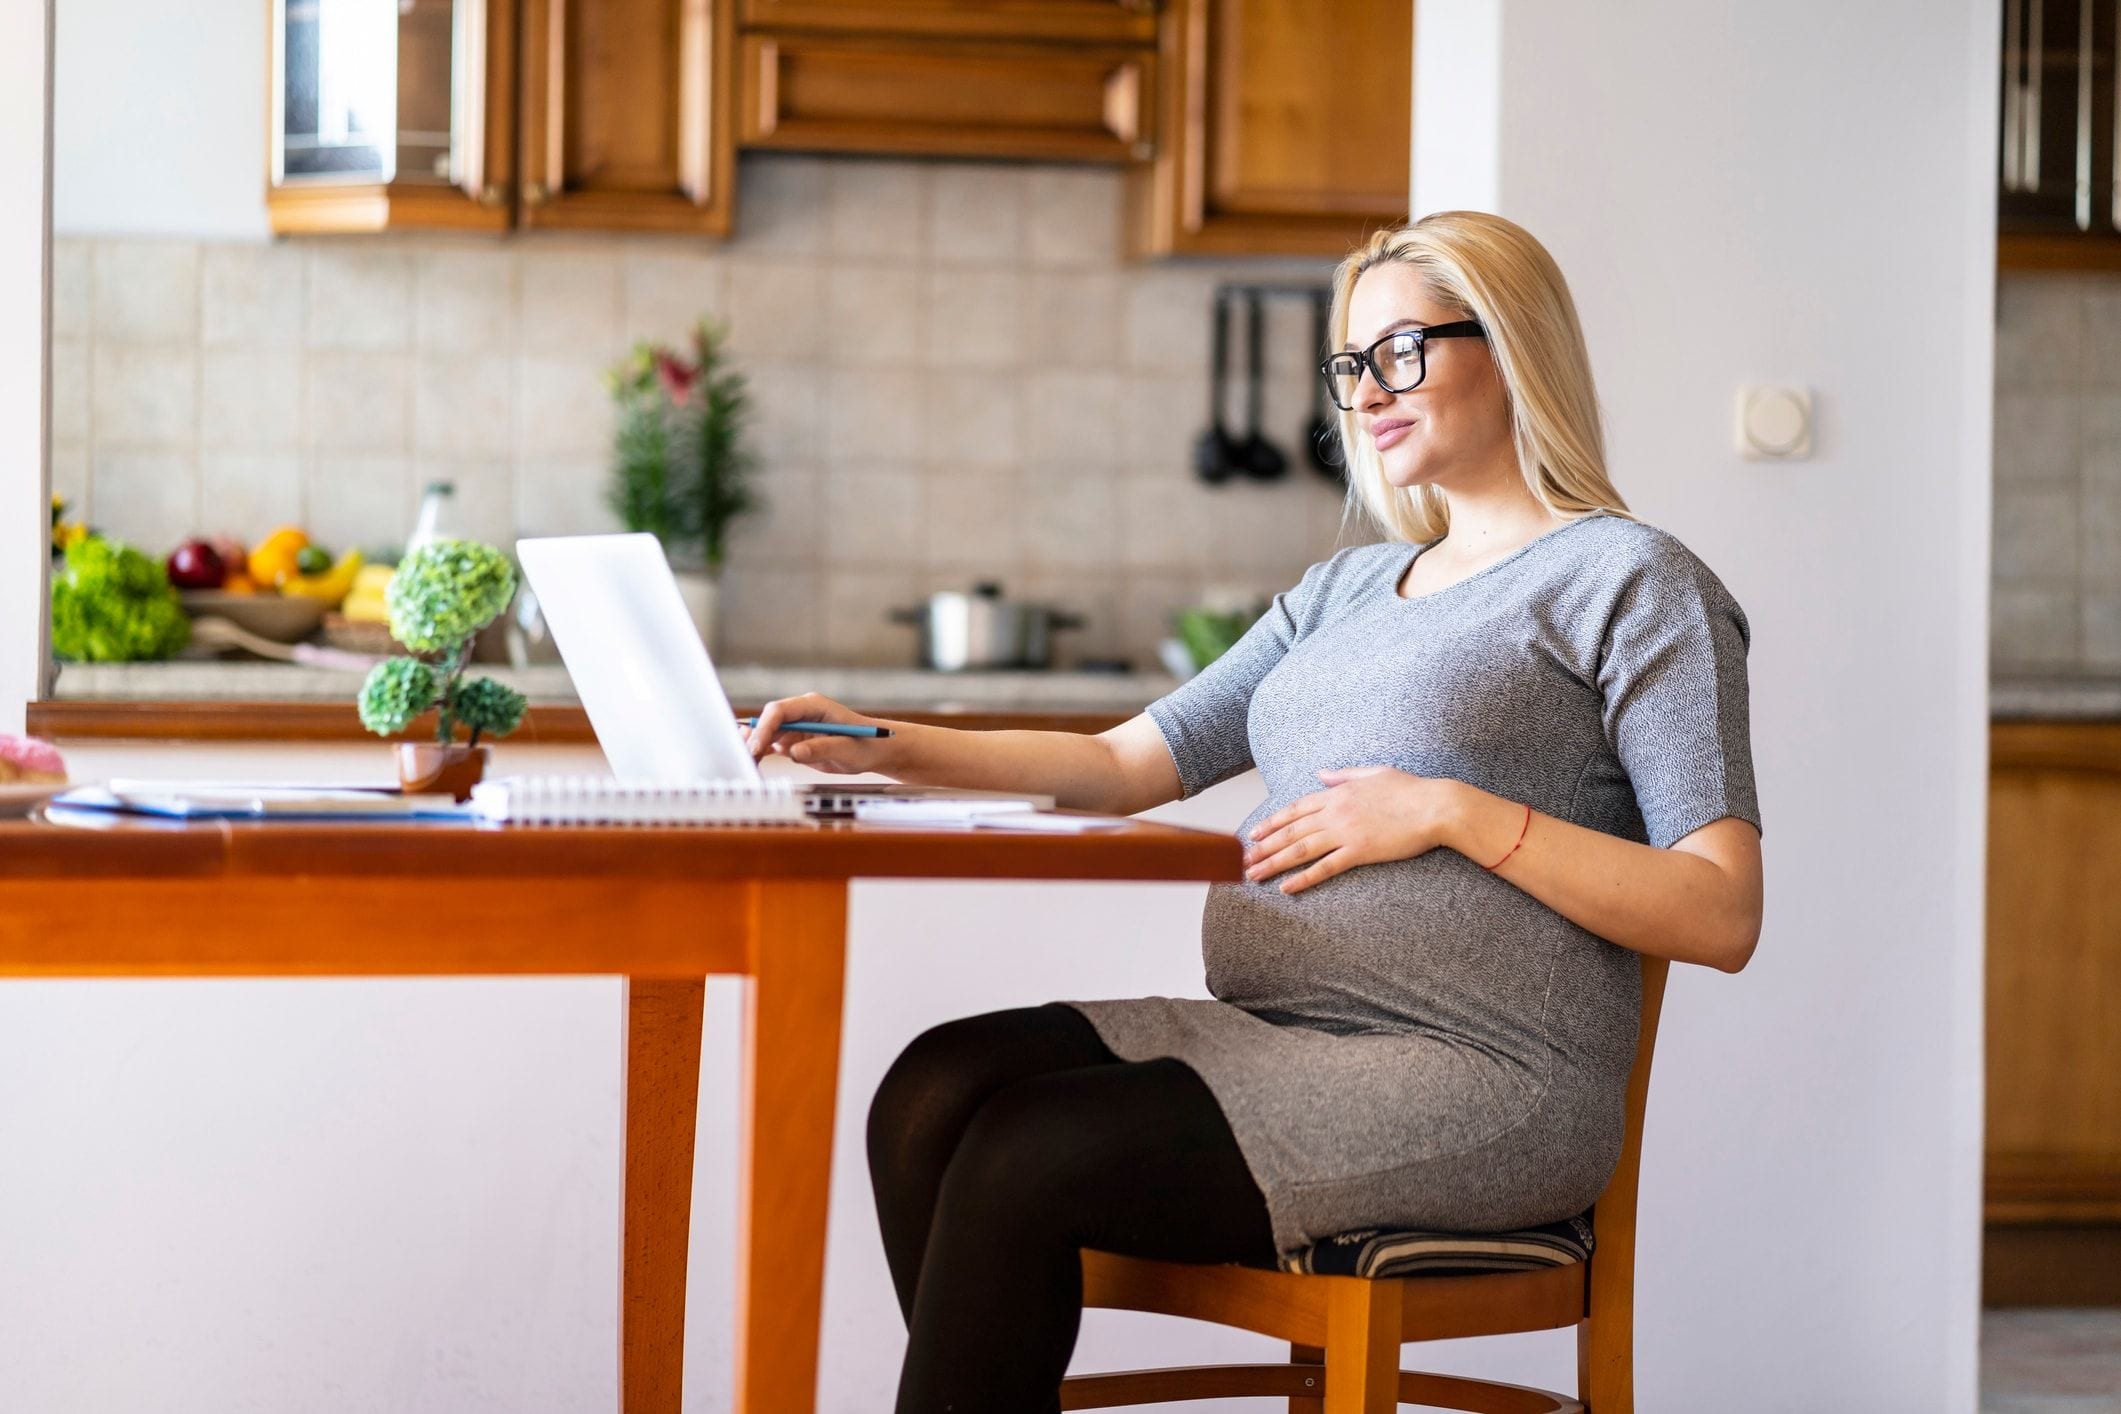 7 steps to create a caregiver or nanny payroll account